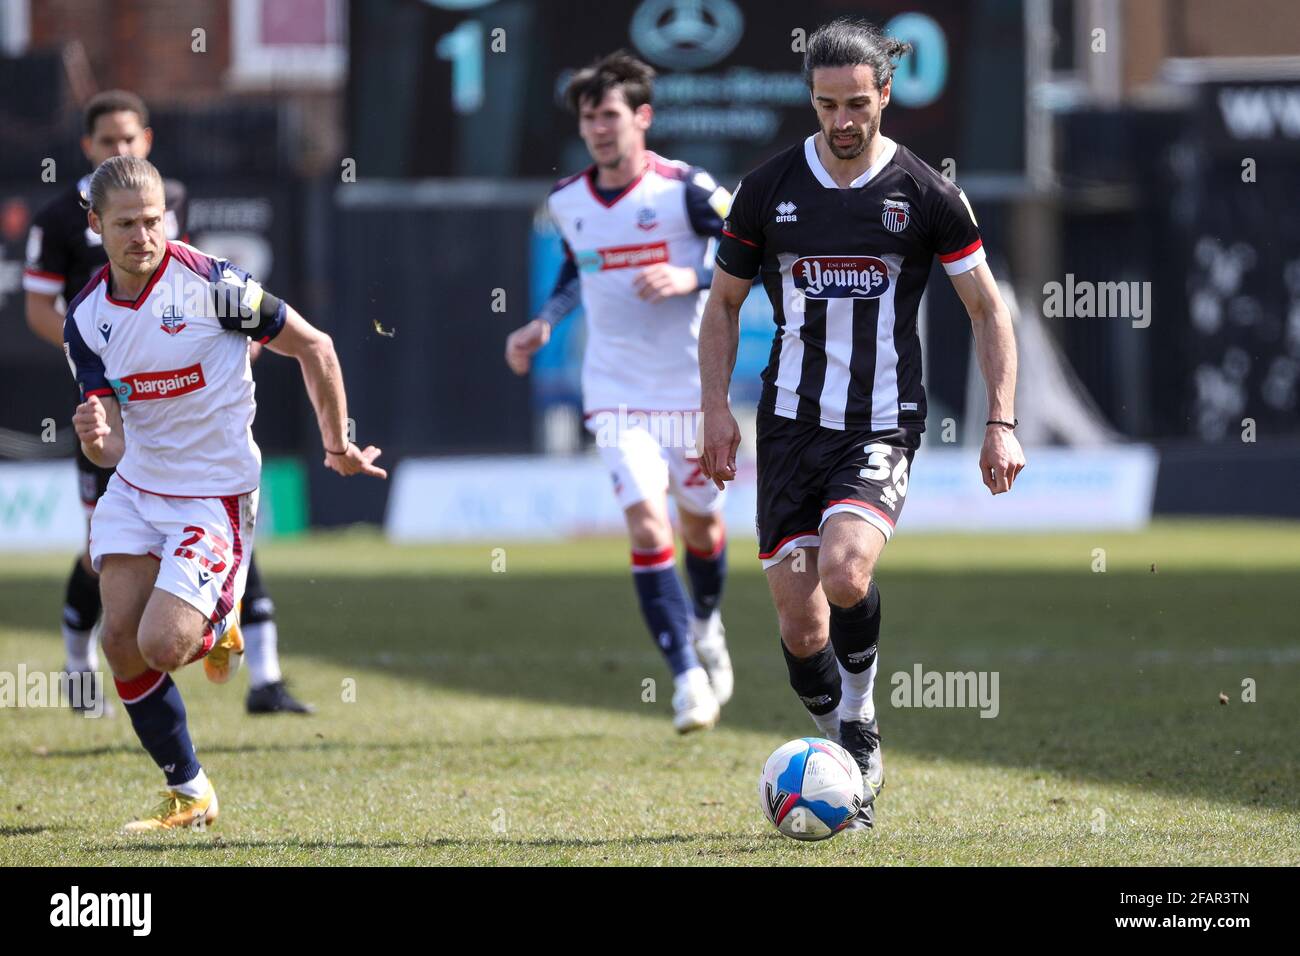 Grimsby Town defender Samuel Habergham (36) during the Sky Bet League 2 match between Grimsby Town and Bolton Wanderers at Blundell Park, Cleethorpes, Stock Photo